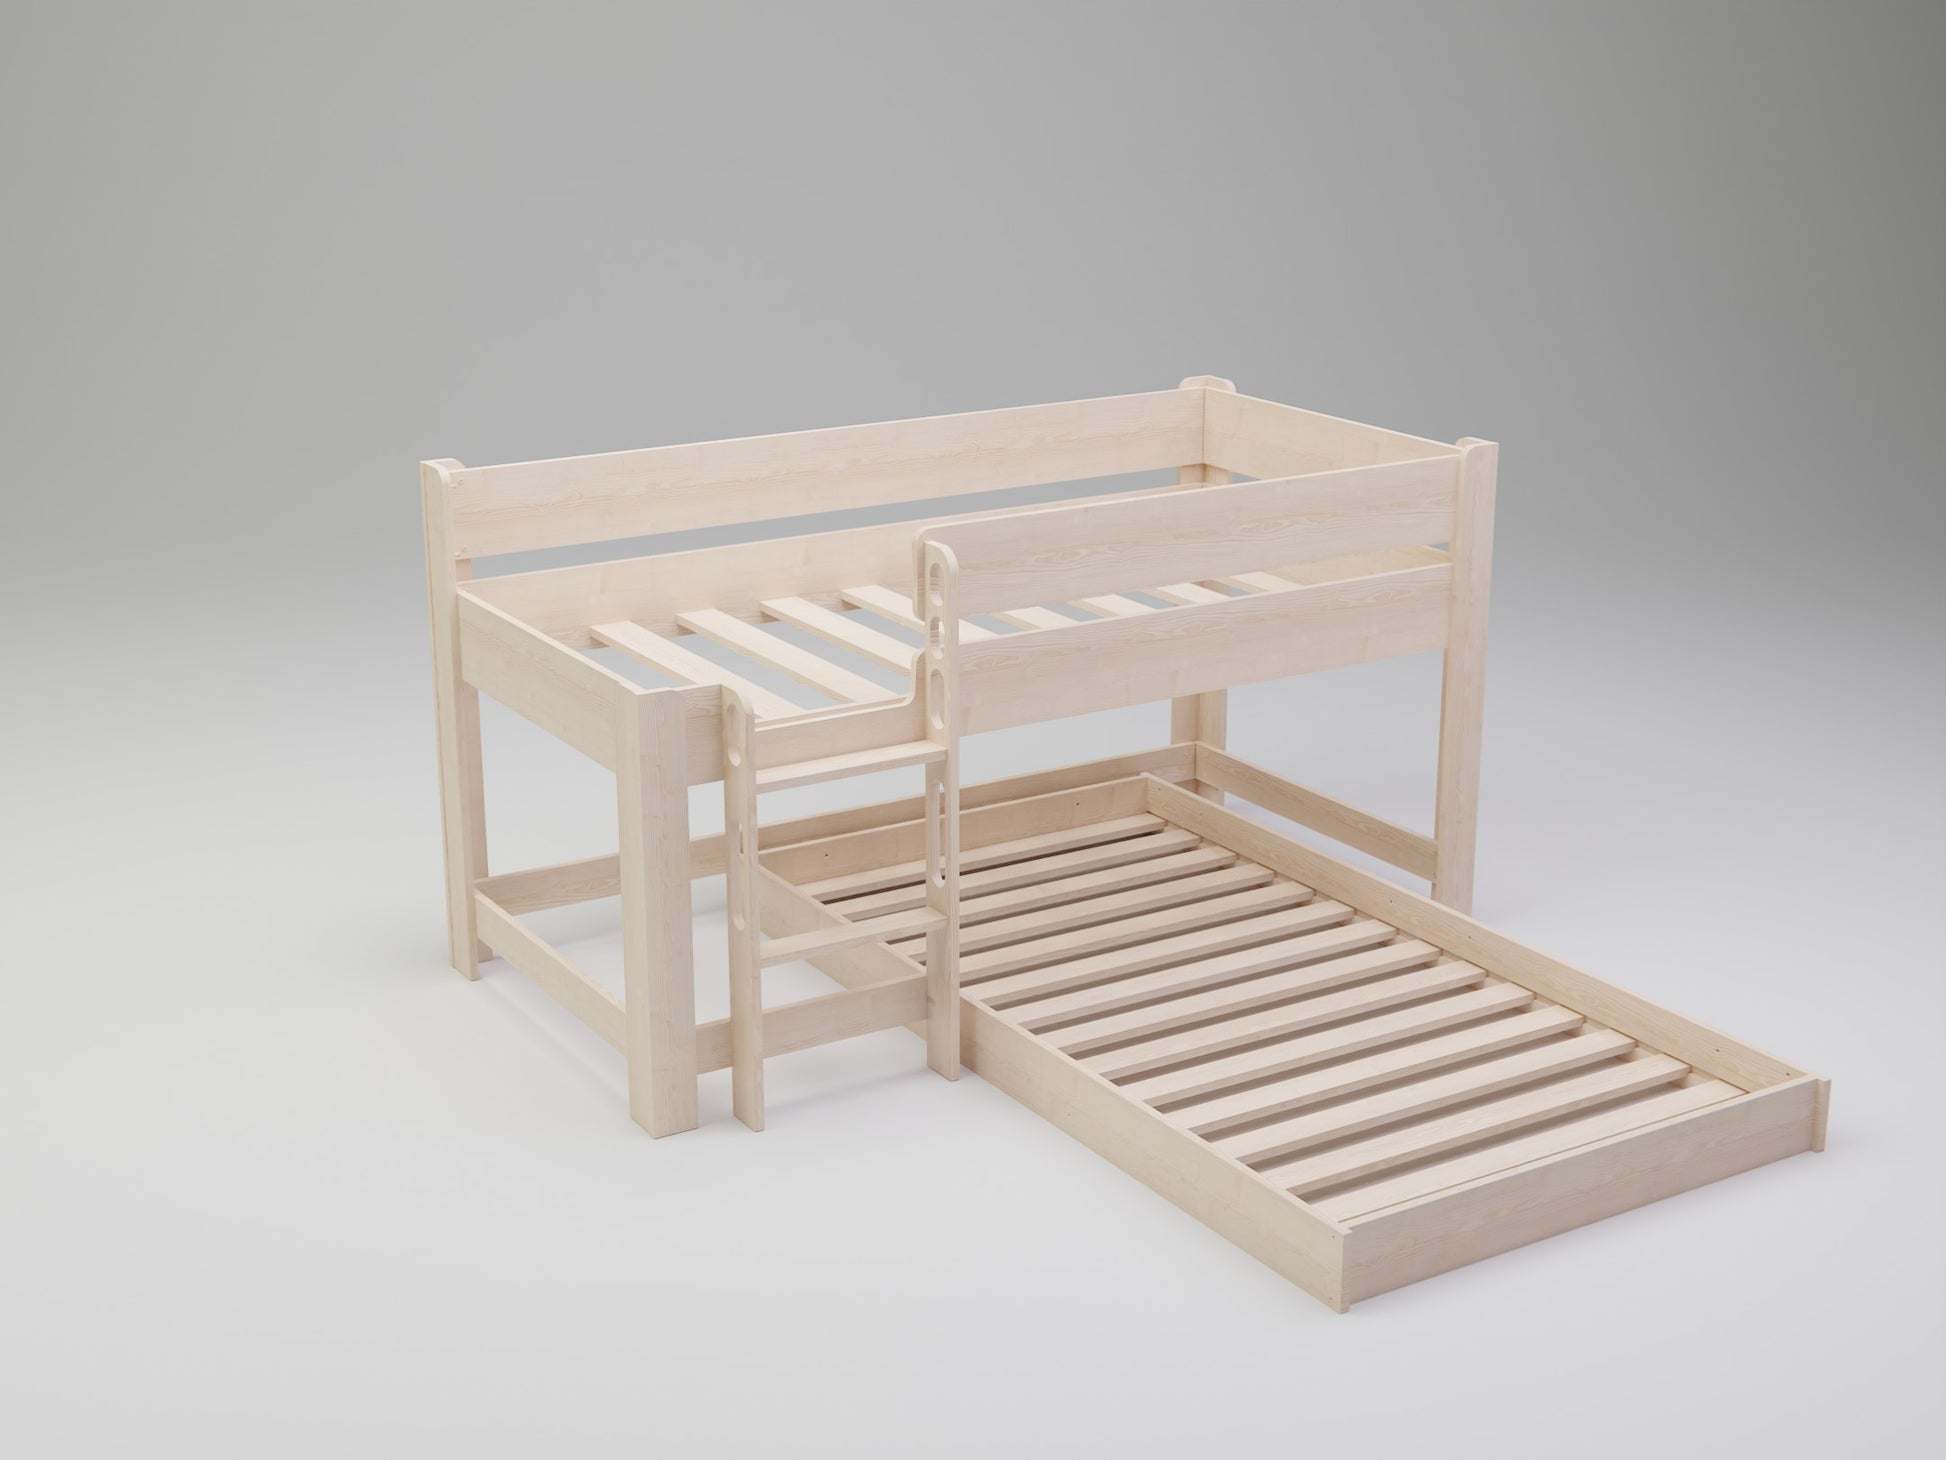 Child-first design: Our wooden kids L shaped loft bed ensures a safe sleeping space for your little ones.